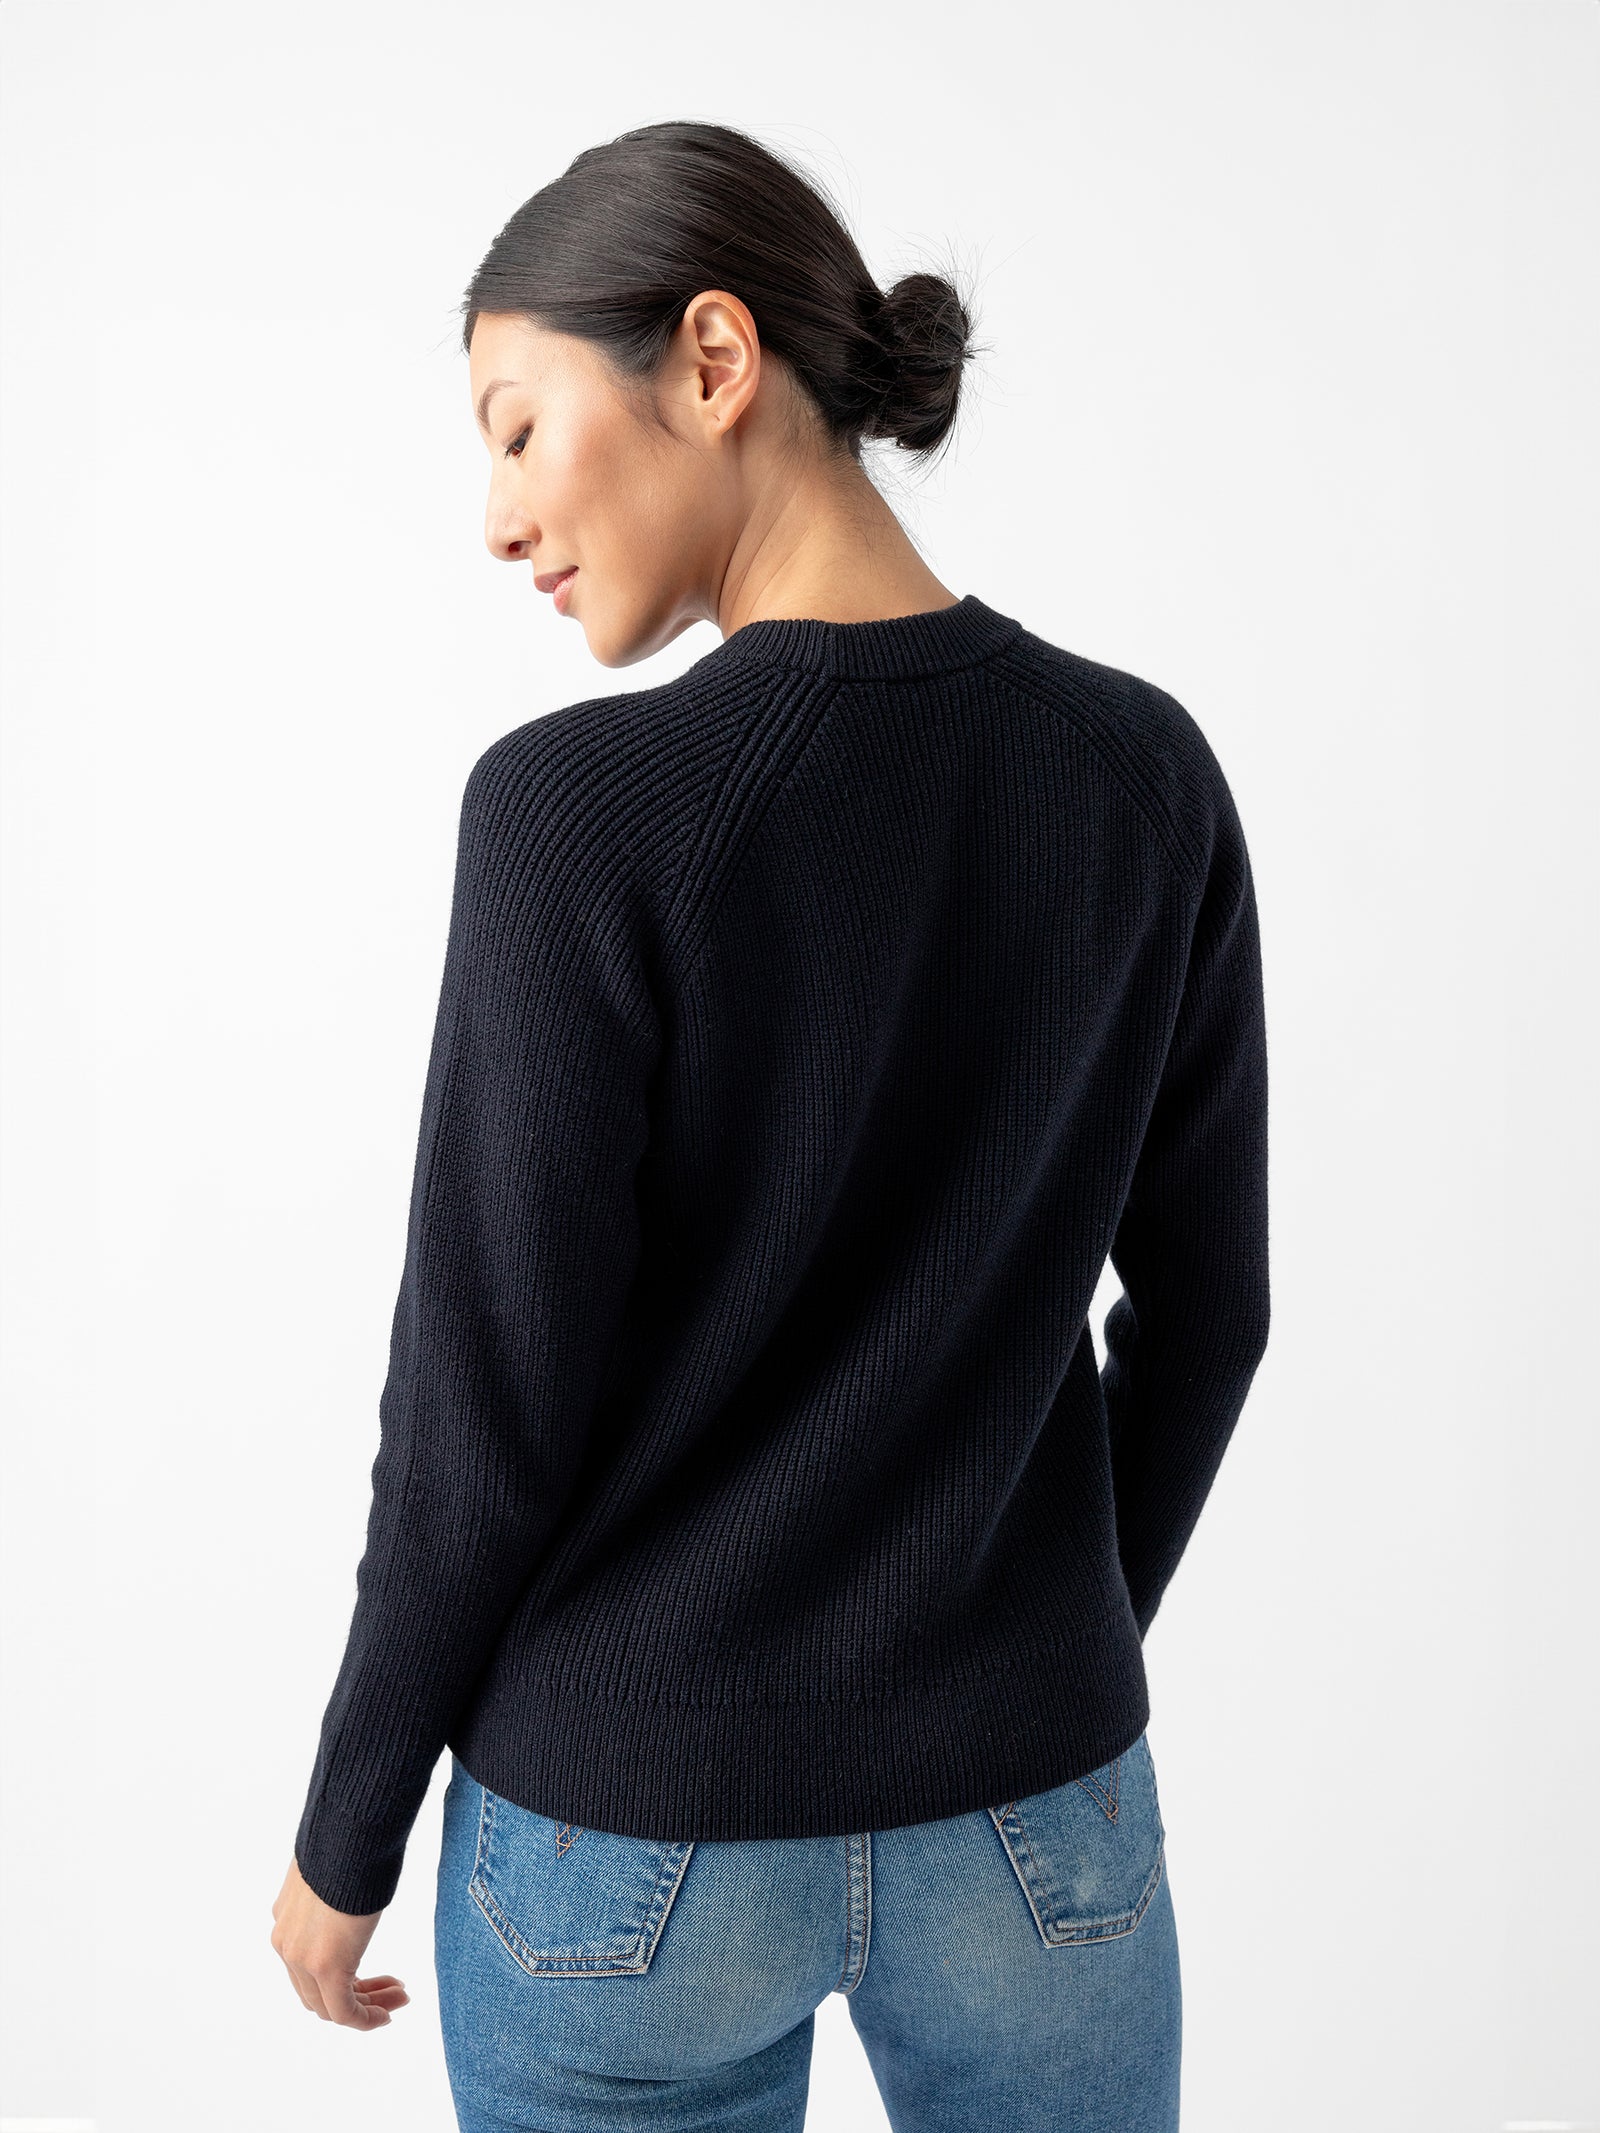 A person with dark hair styled in a low bun is wearing the Women's Classic Crewneck by Cozy Earth and blue jeans, standing with their back facing the camera. The background is white and plain. 